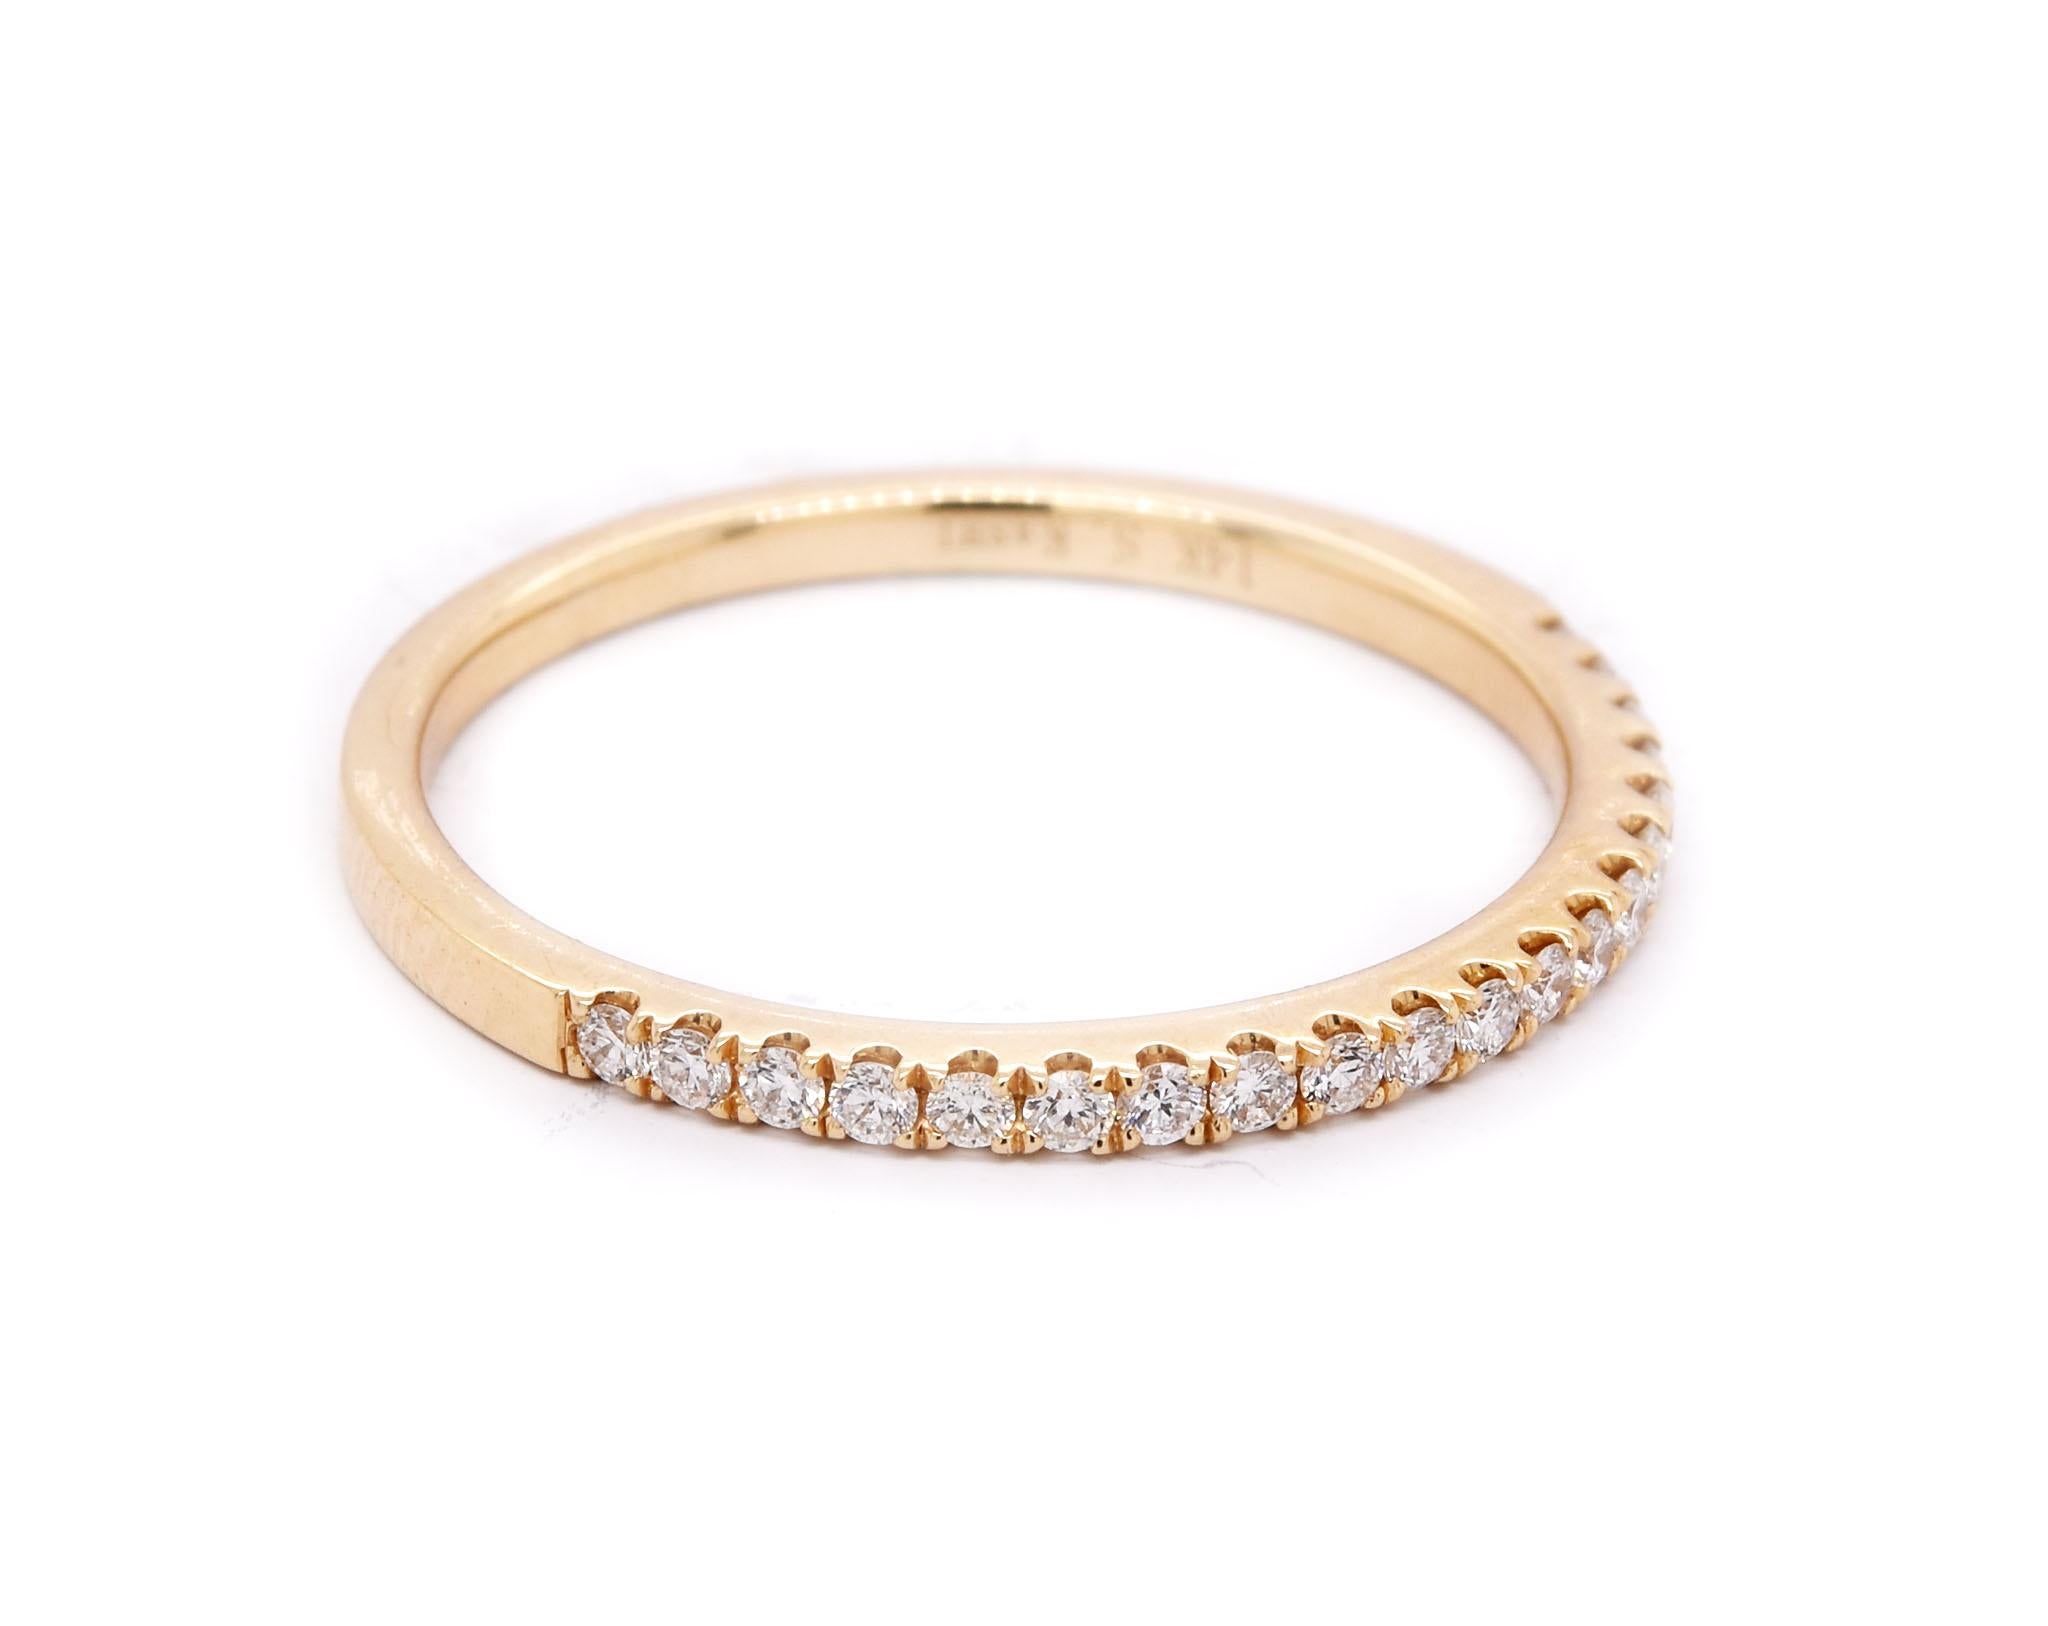 Designer: custom 
Material: 14K yellow gold
Diamonds: 20 round brilliant cut = .20cttw
Color: G
Clarity: VS1
Ring Size: 6.5
Dimensions: ring is 1.5mm wide
Weight: 1.51 grams